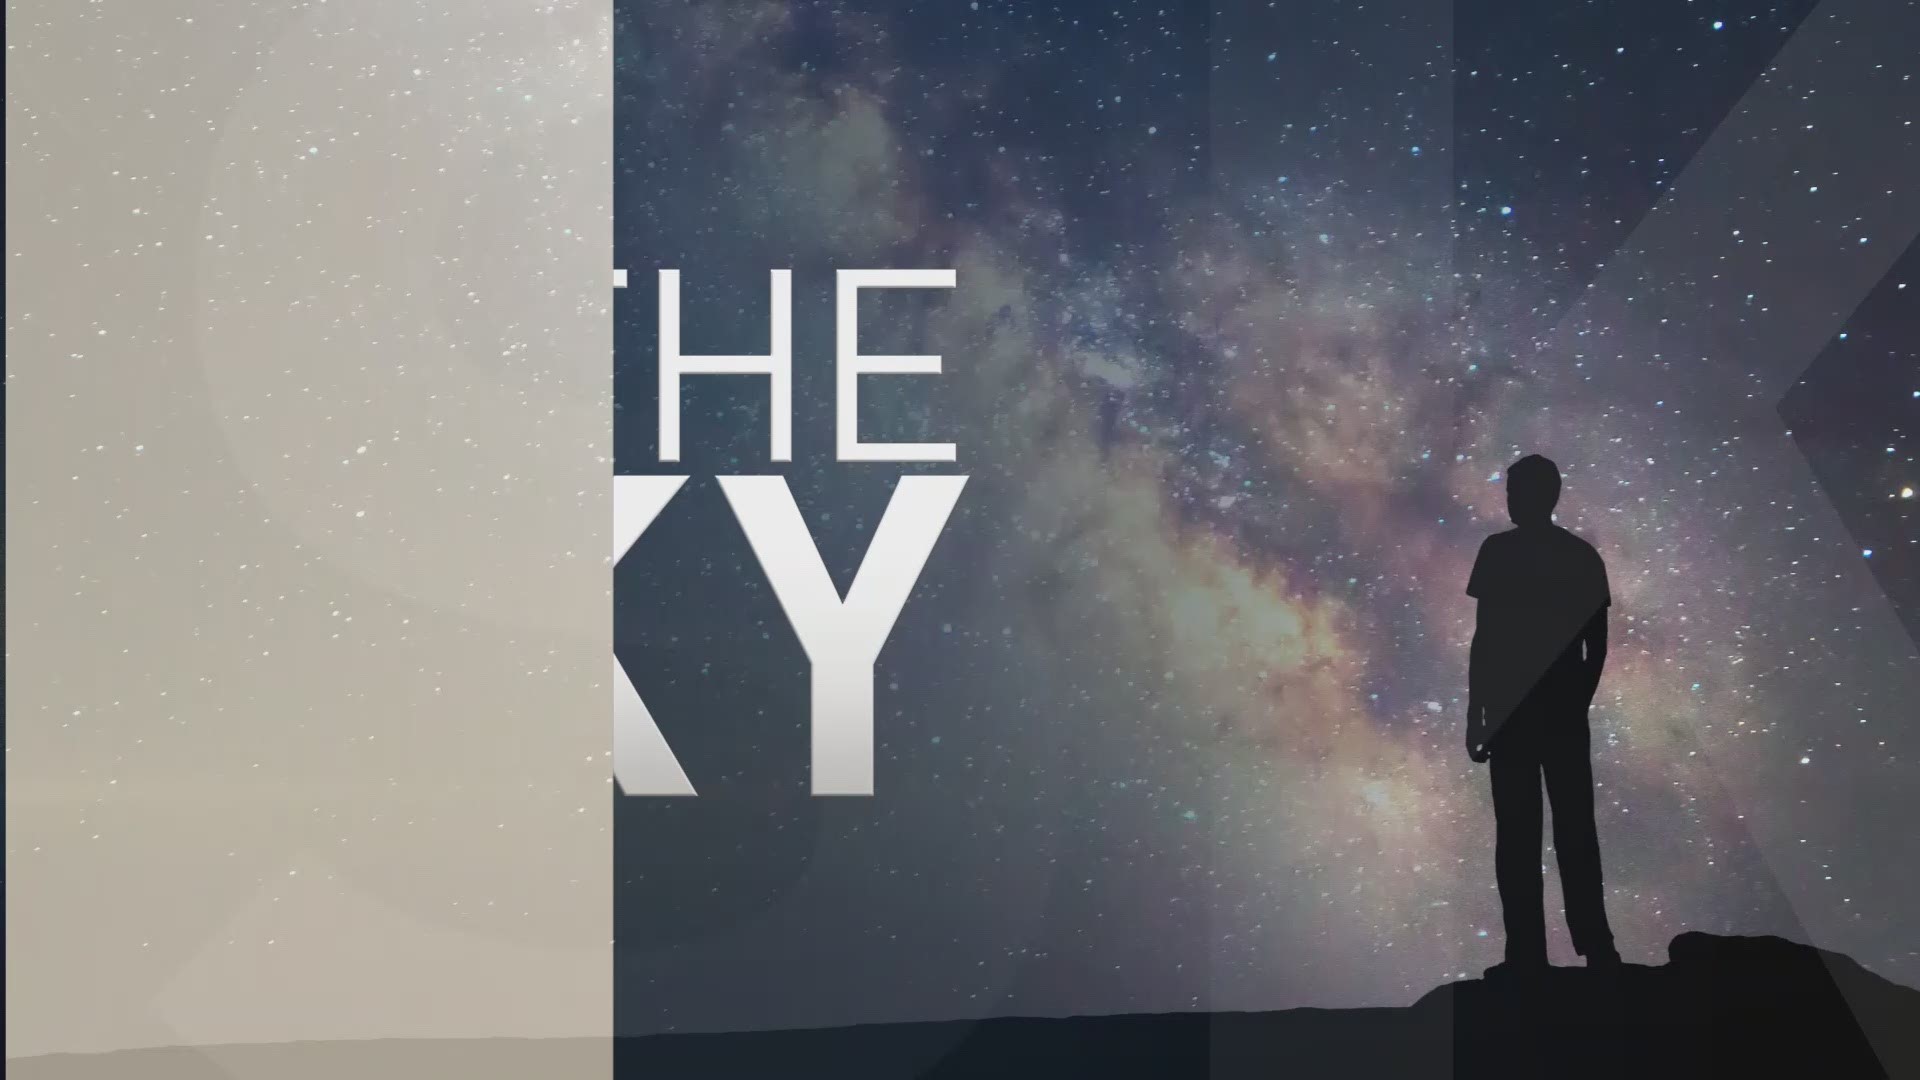 WATCH | Time for the year's best & brightest meteor shower - "The Leonids"! Learn more in this edition of "In the Sky" with Jay Reynolds and Gale Franko. #3weather